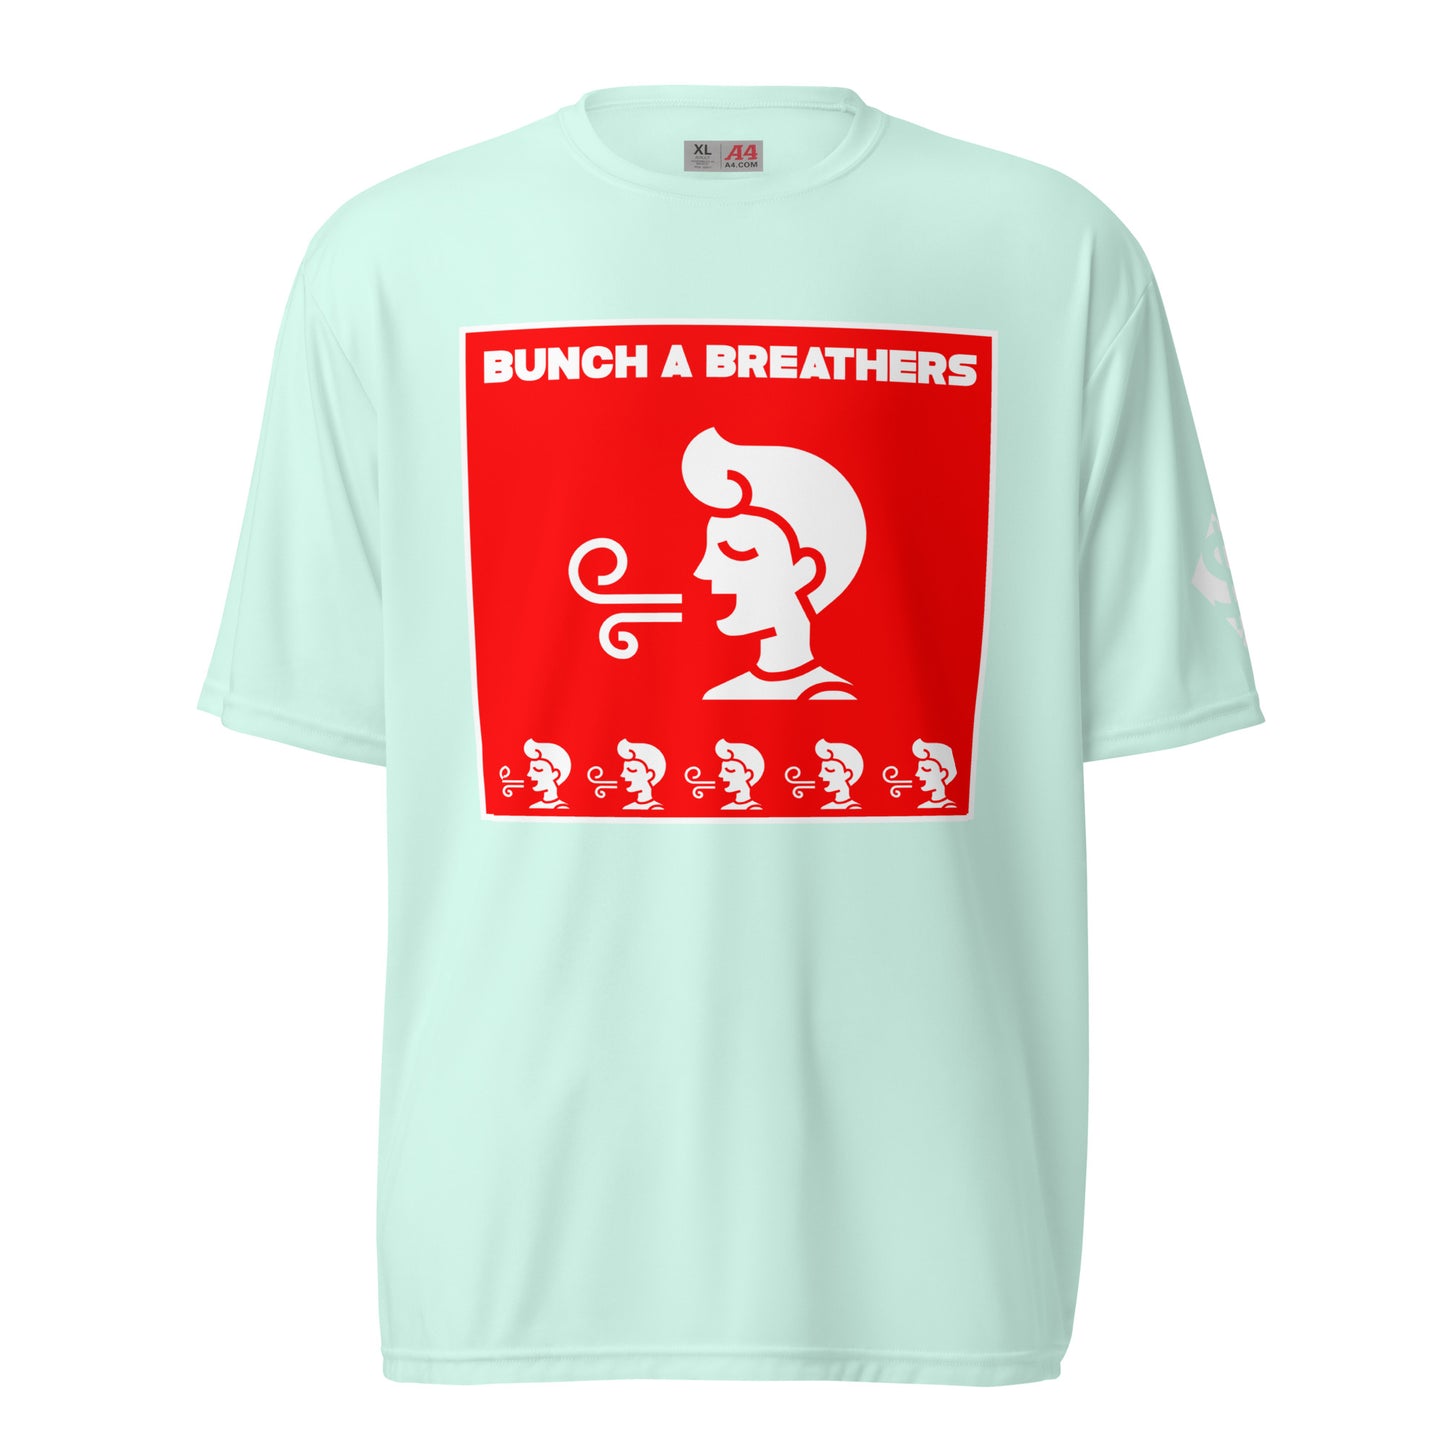 Bunch A Breathers - Premium Tee